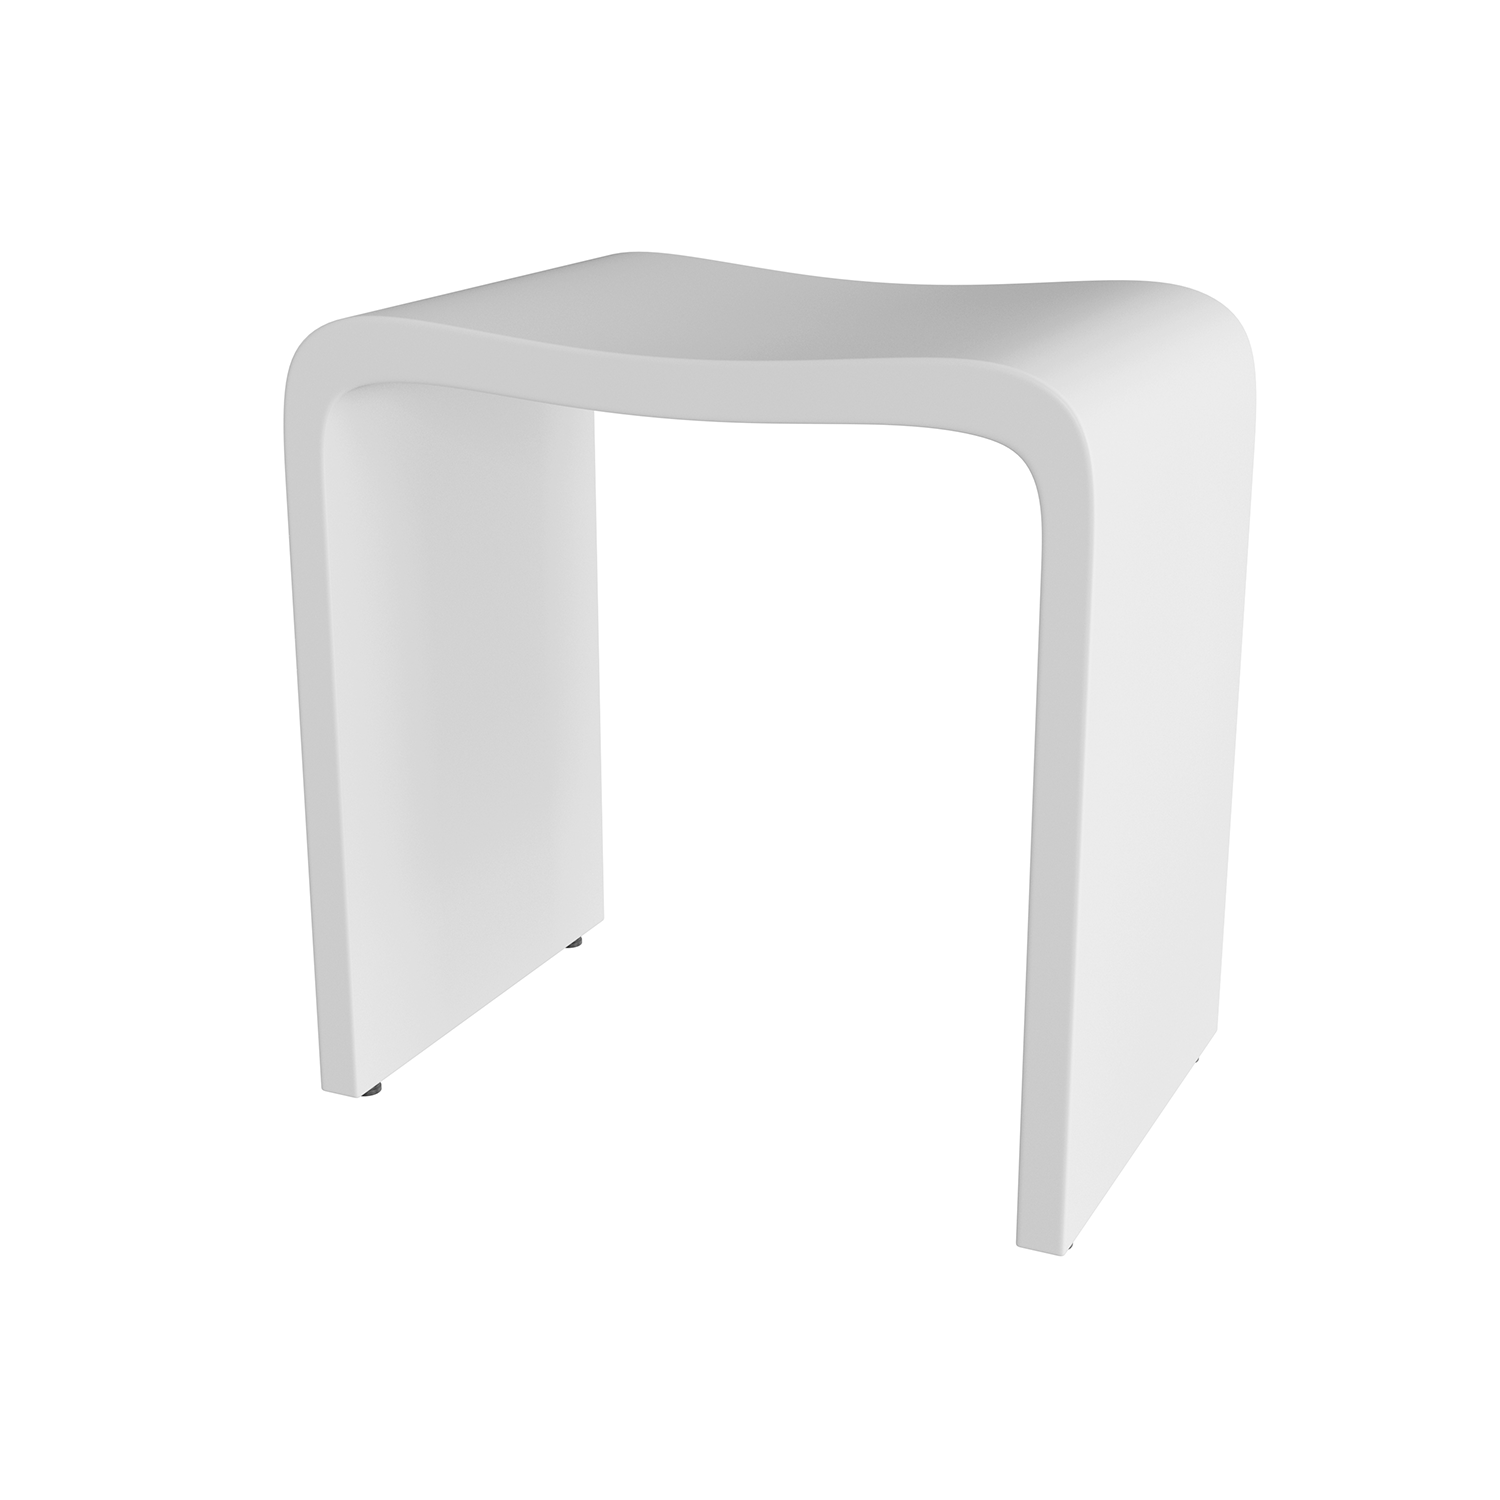 DAX Solid Surface Bathroom Stool,  Matte White Finish, 15-3/4 x 17-1/8 x 11-13/16 Inches (DAX-ST-02)